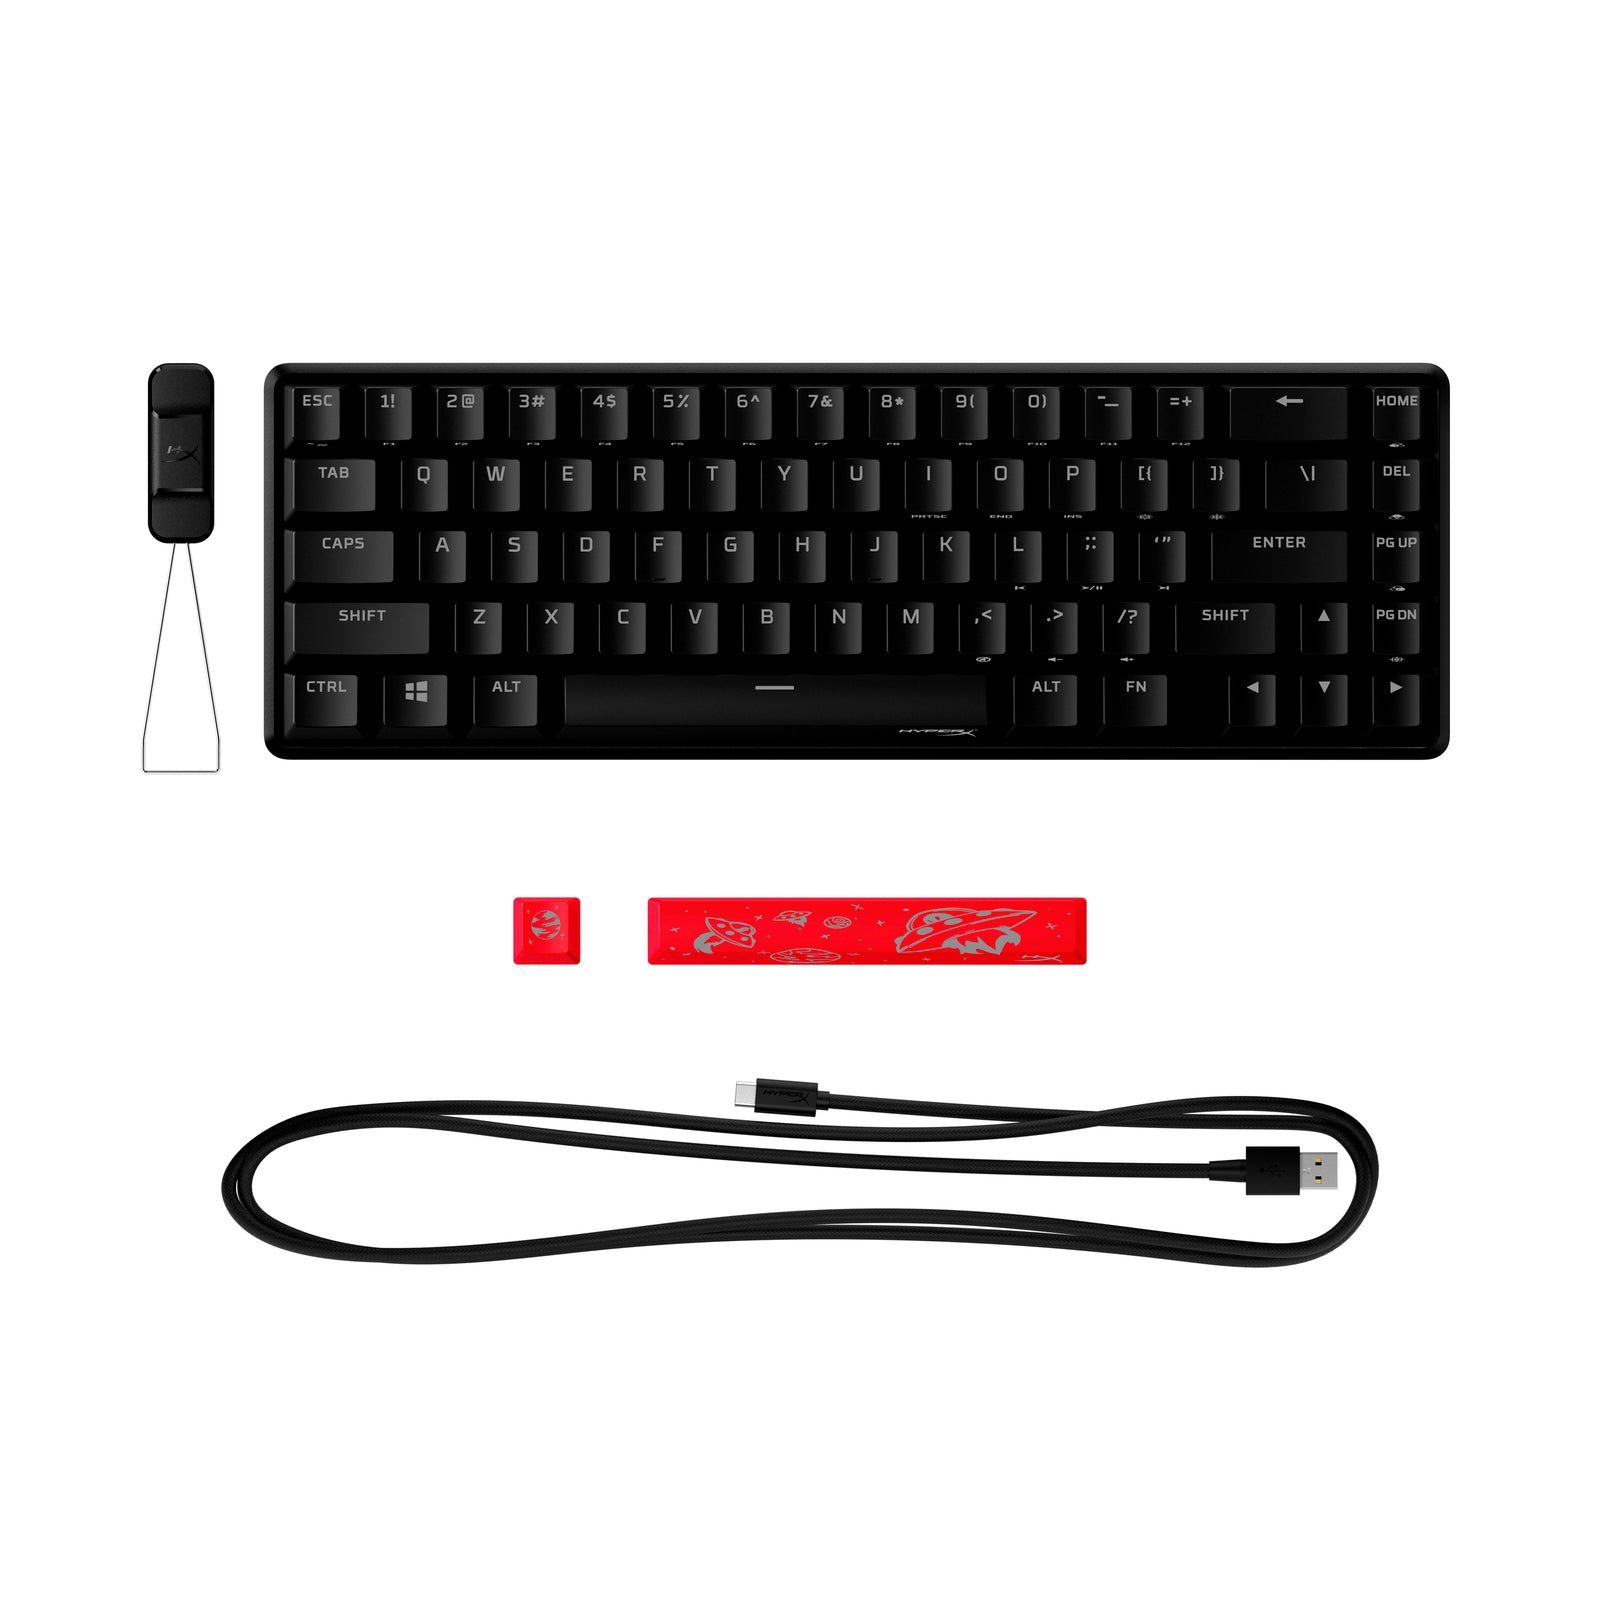 HyperX Alloy Origins 65 mechanical gaming keyboard featuring detachable cable and HyperX designed spacebar